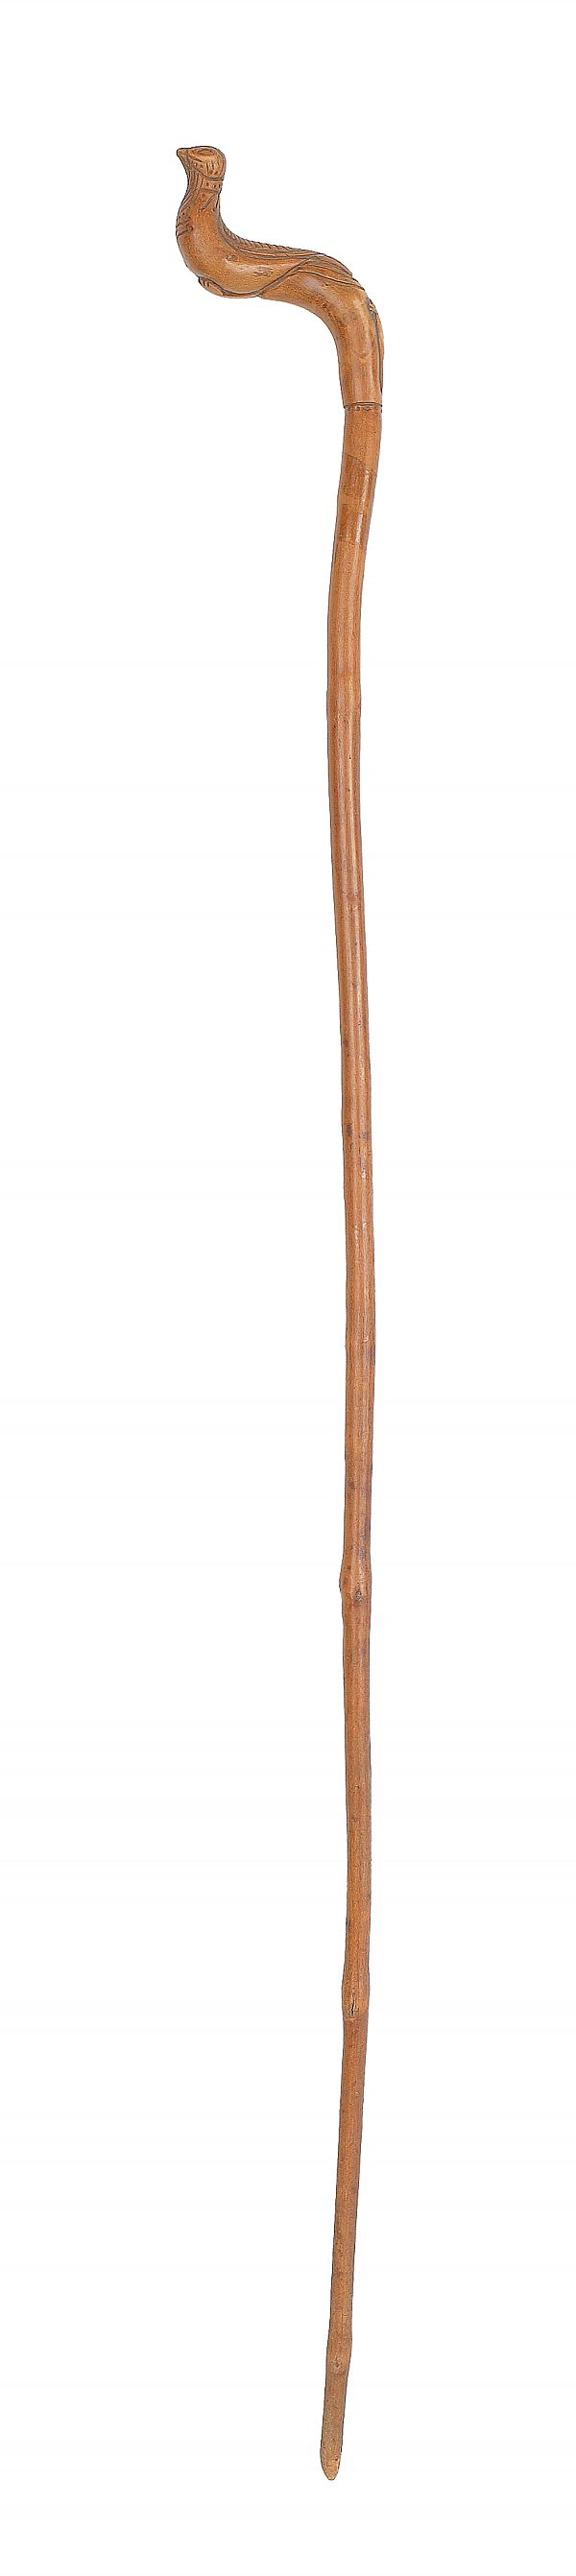 Carved cane late 19th c with a 1750e4